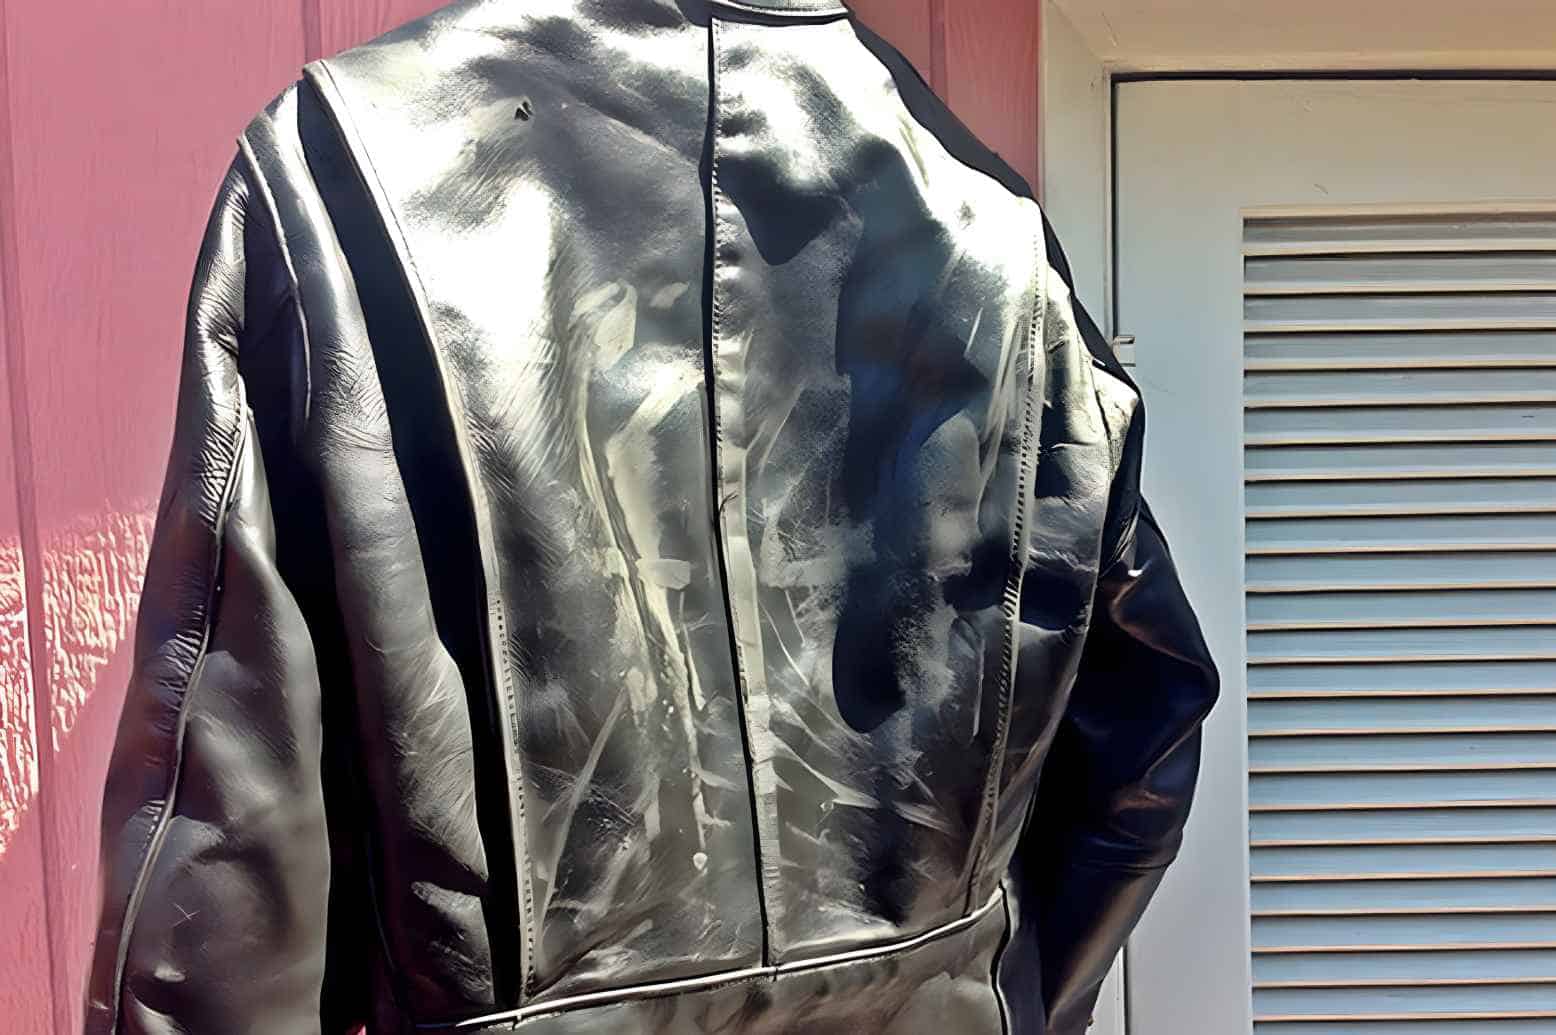 How To Clean A Leather Jacket